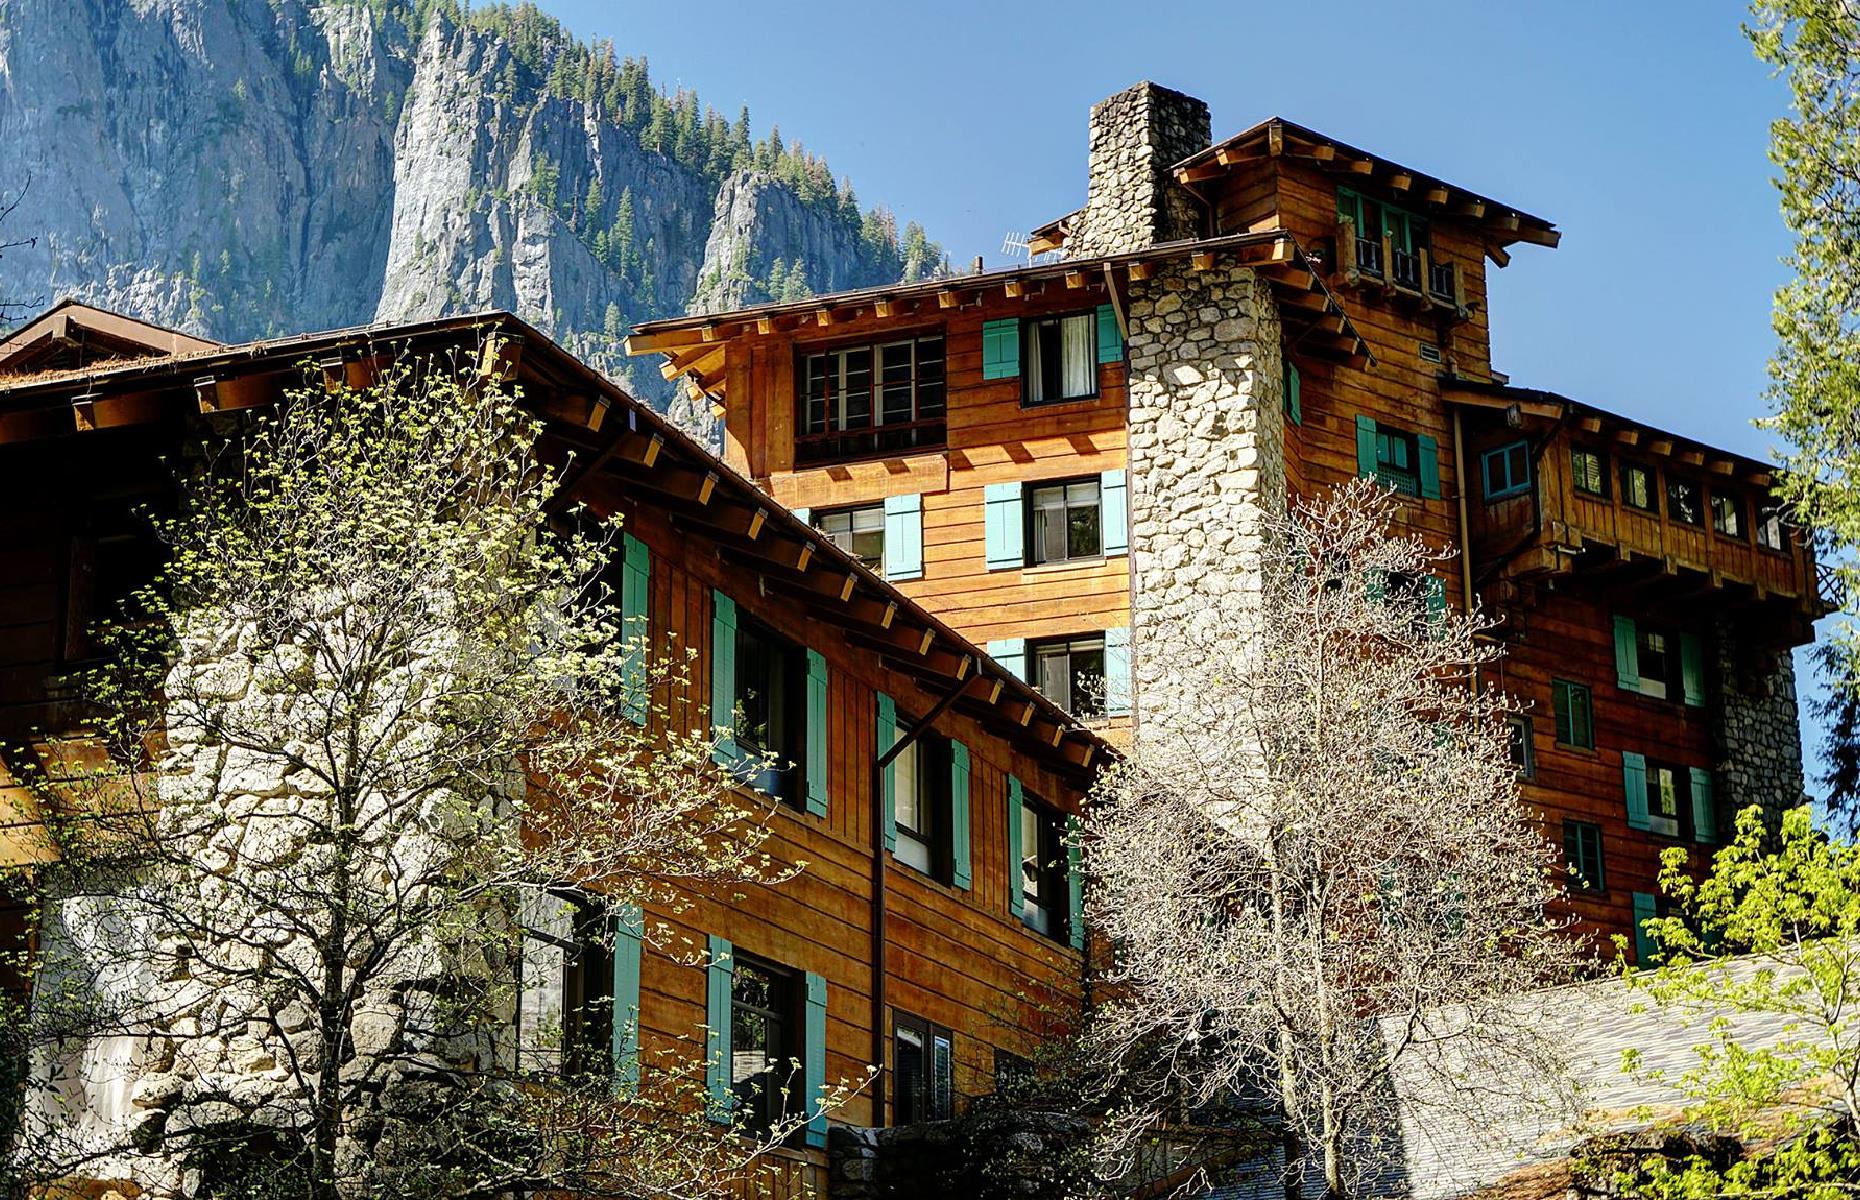 <p>A stunning example of a national park lodge, <a href="https://www.travelyosemite.com/lodging/the-ahwahnee">The Ahwahnee</a> was built in the 1920s and continues to exude elegance and charm. The hotel sits on the east end of the famed Yosemite Valley, with easy access to the park’s most revered sights. Guests of The Ahwahnee can choose to stay in regular hotel rooms and suites, or more private hotel cottages, while the impressive, communal Grand Lounge, with its exposed beams and fireplace, is a lovely place to unwind. </p>